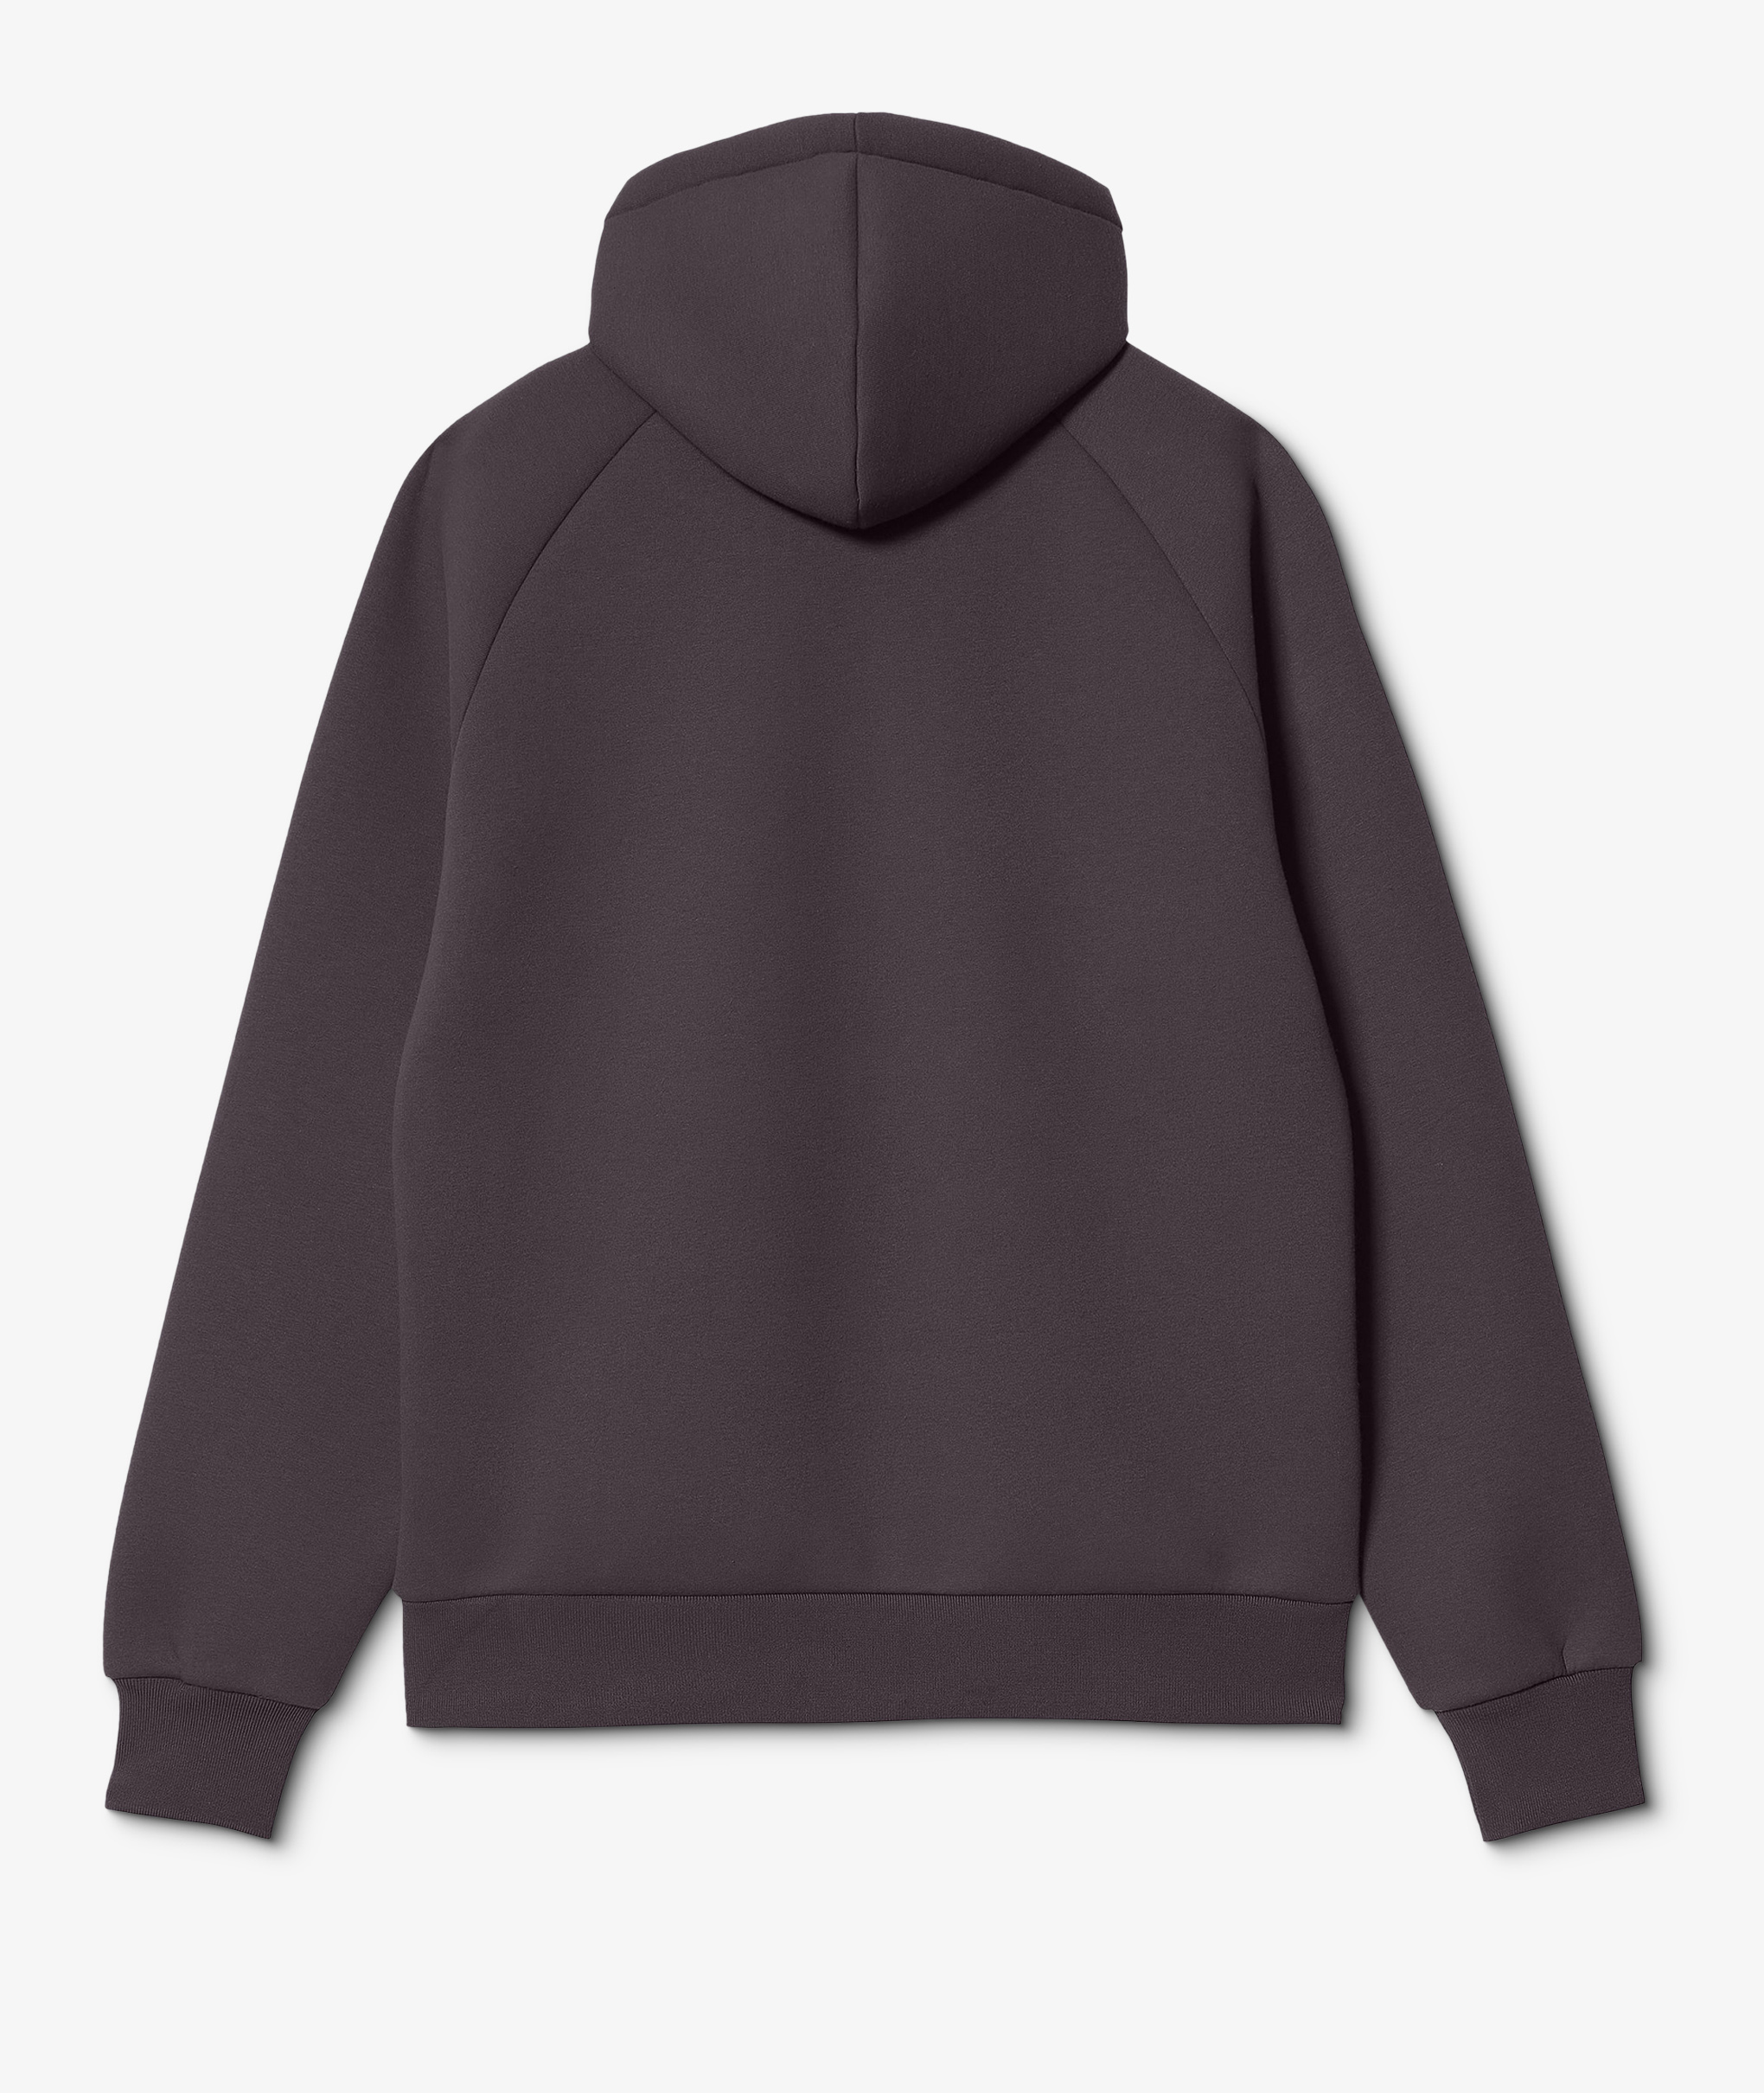 Norse Store | Shipping Worldwide - Carhartt WIP Car-Lux Hooded Jacket ...